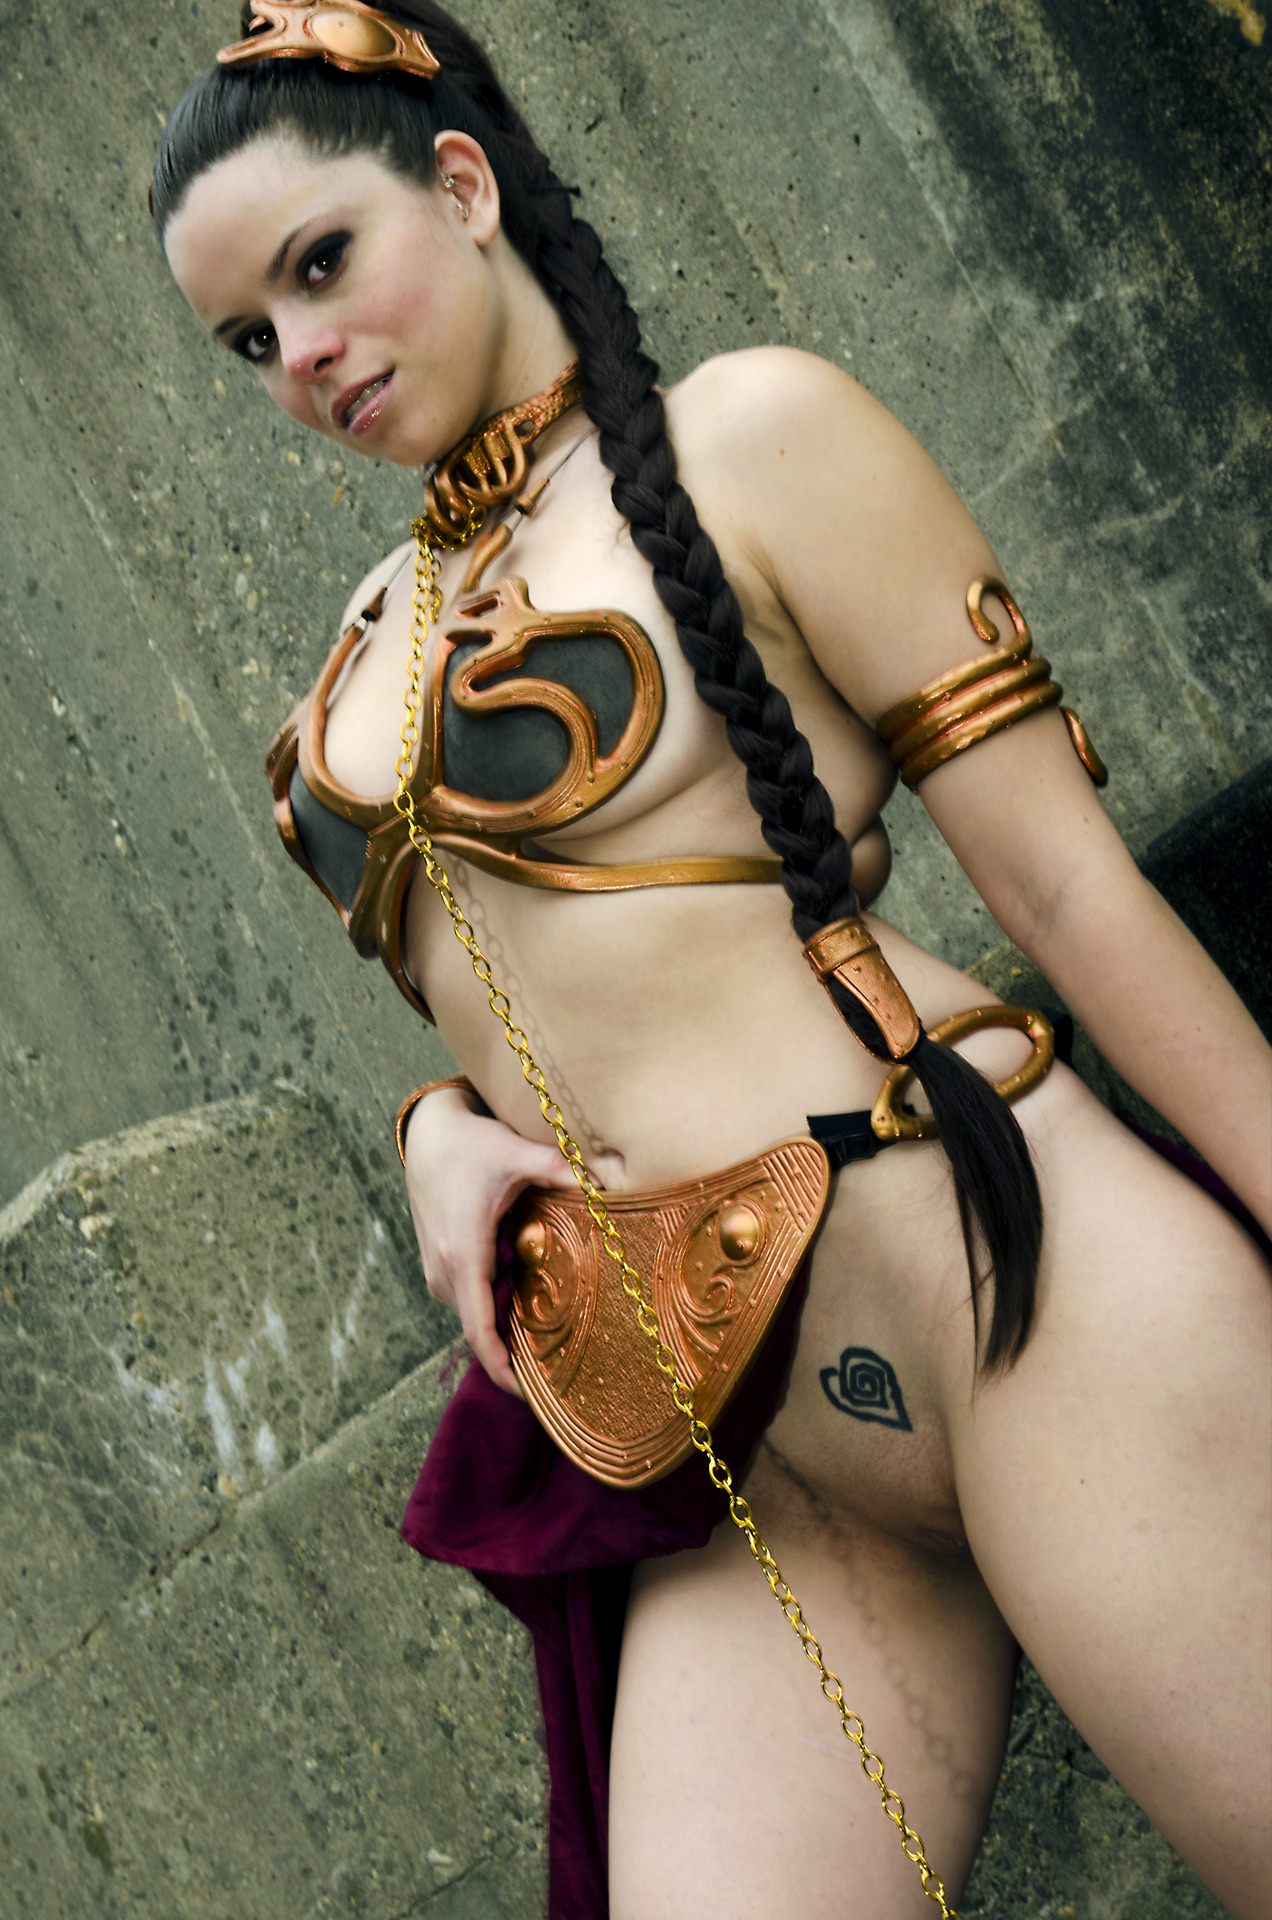 slave leia flashes her pussy.